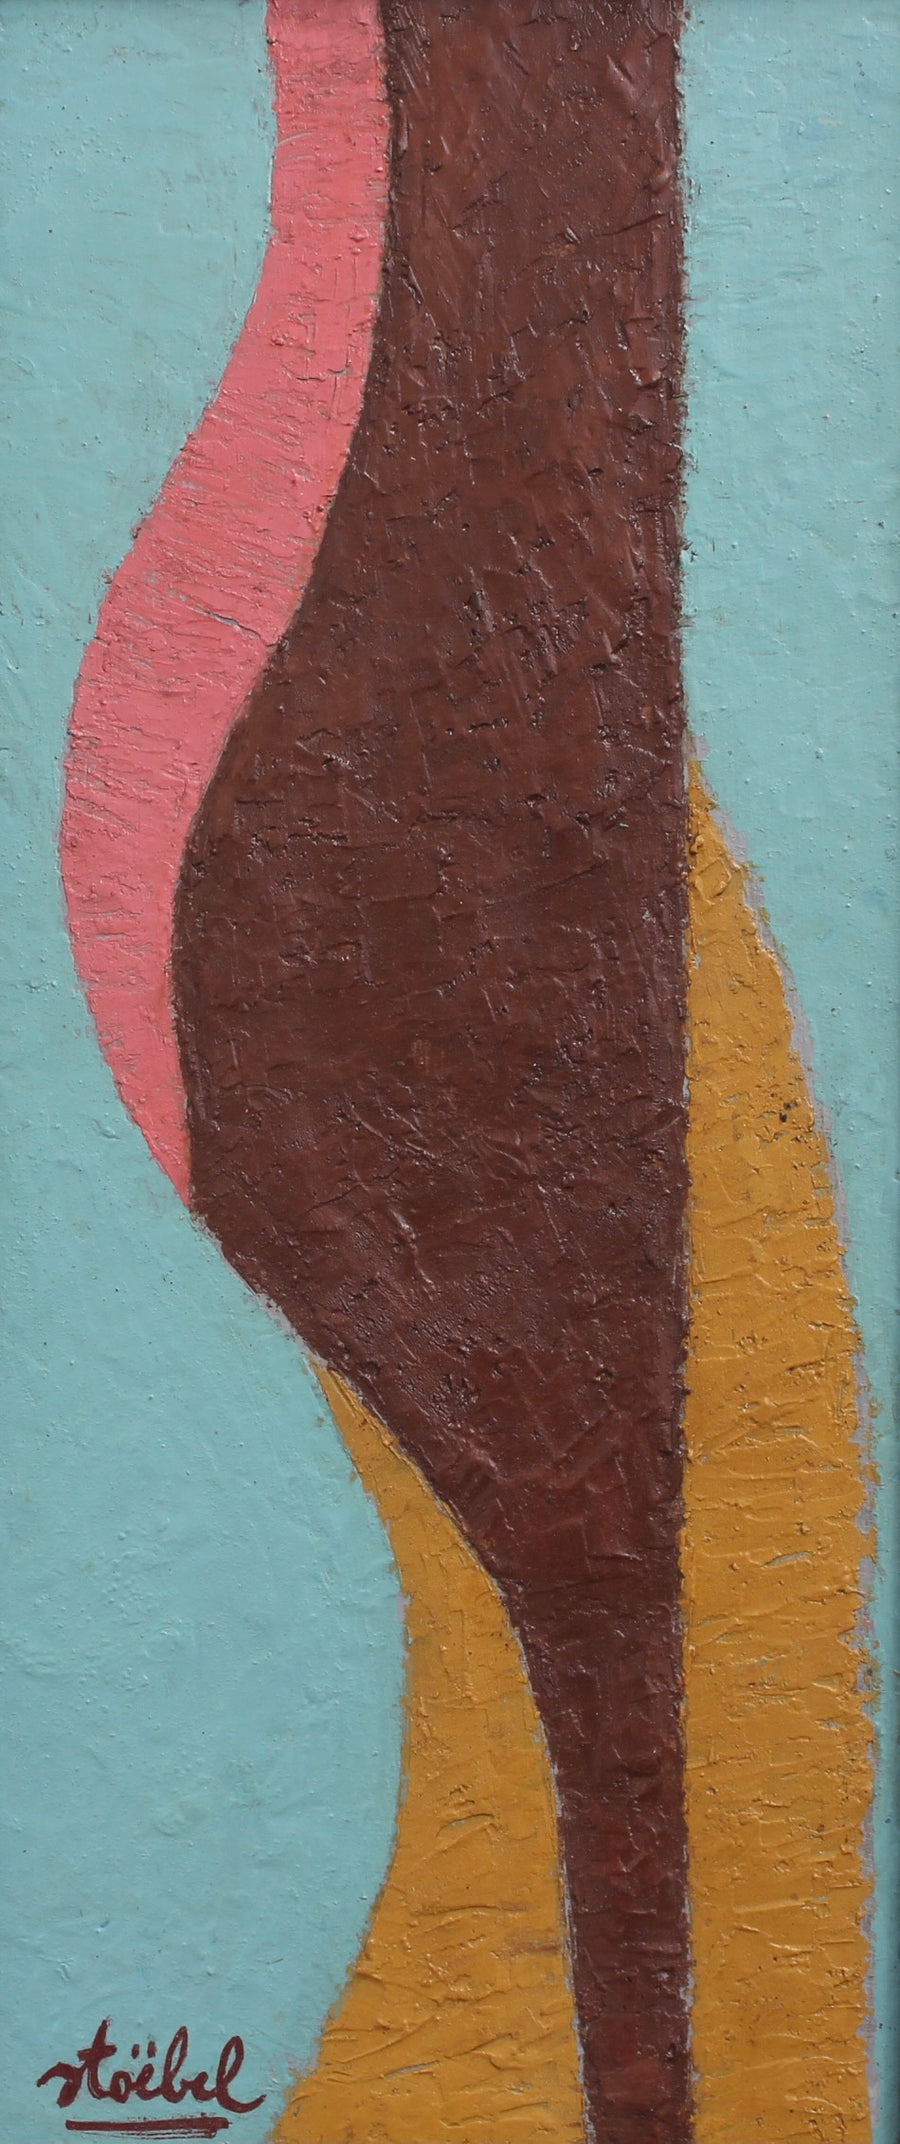 'Abstract Composition' by Edgar Stoëbel (circa 1960s)